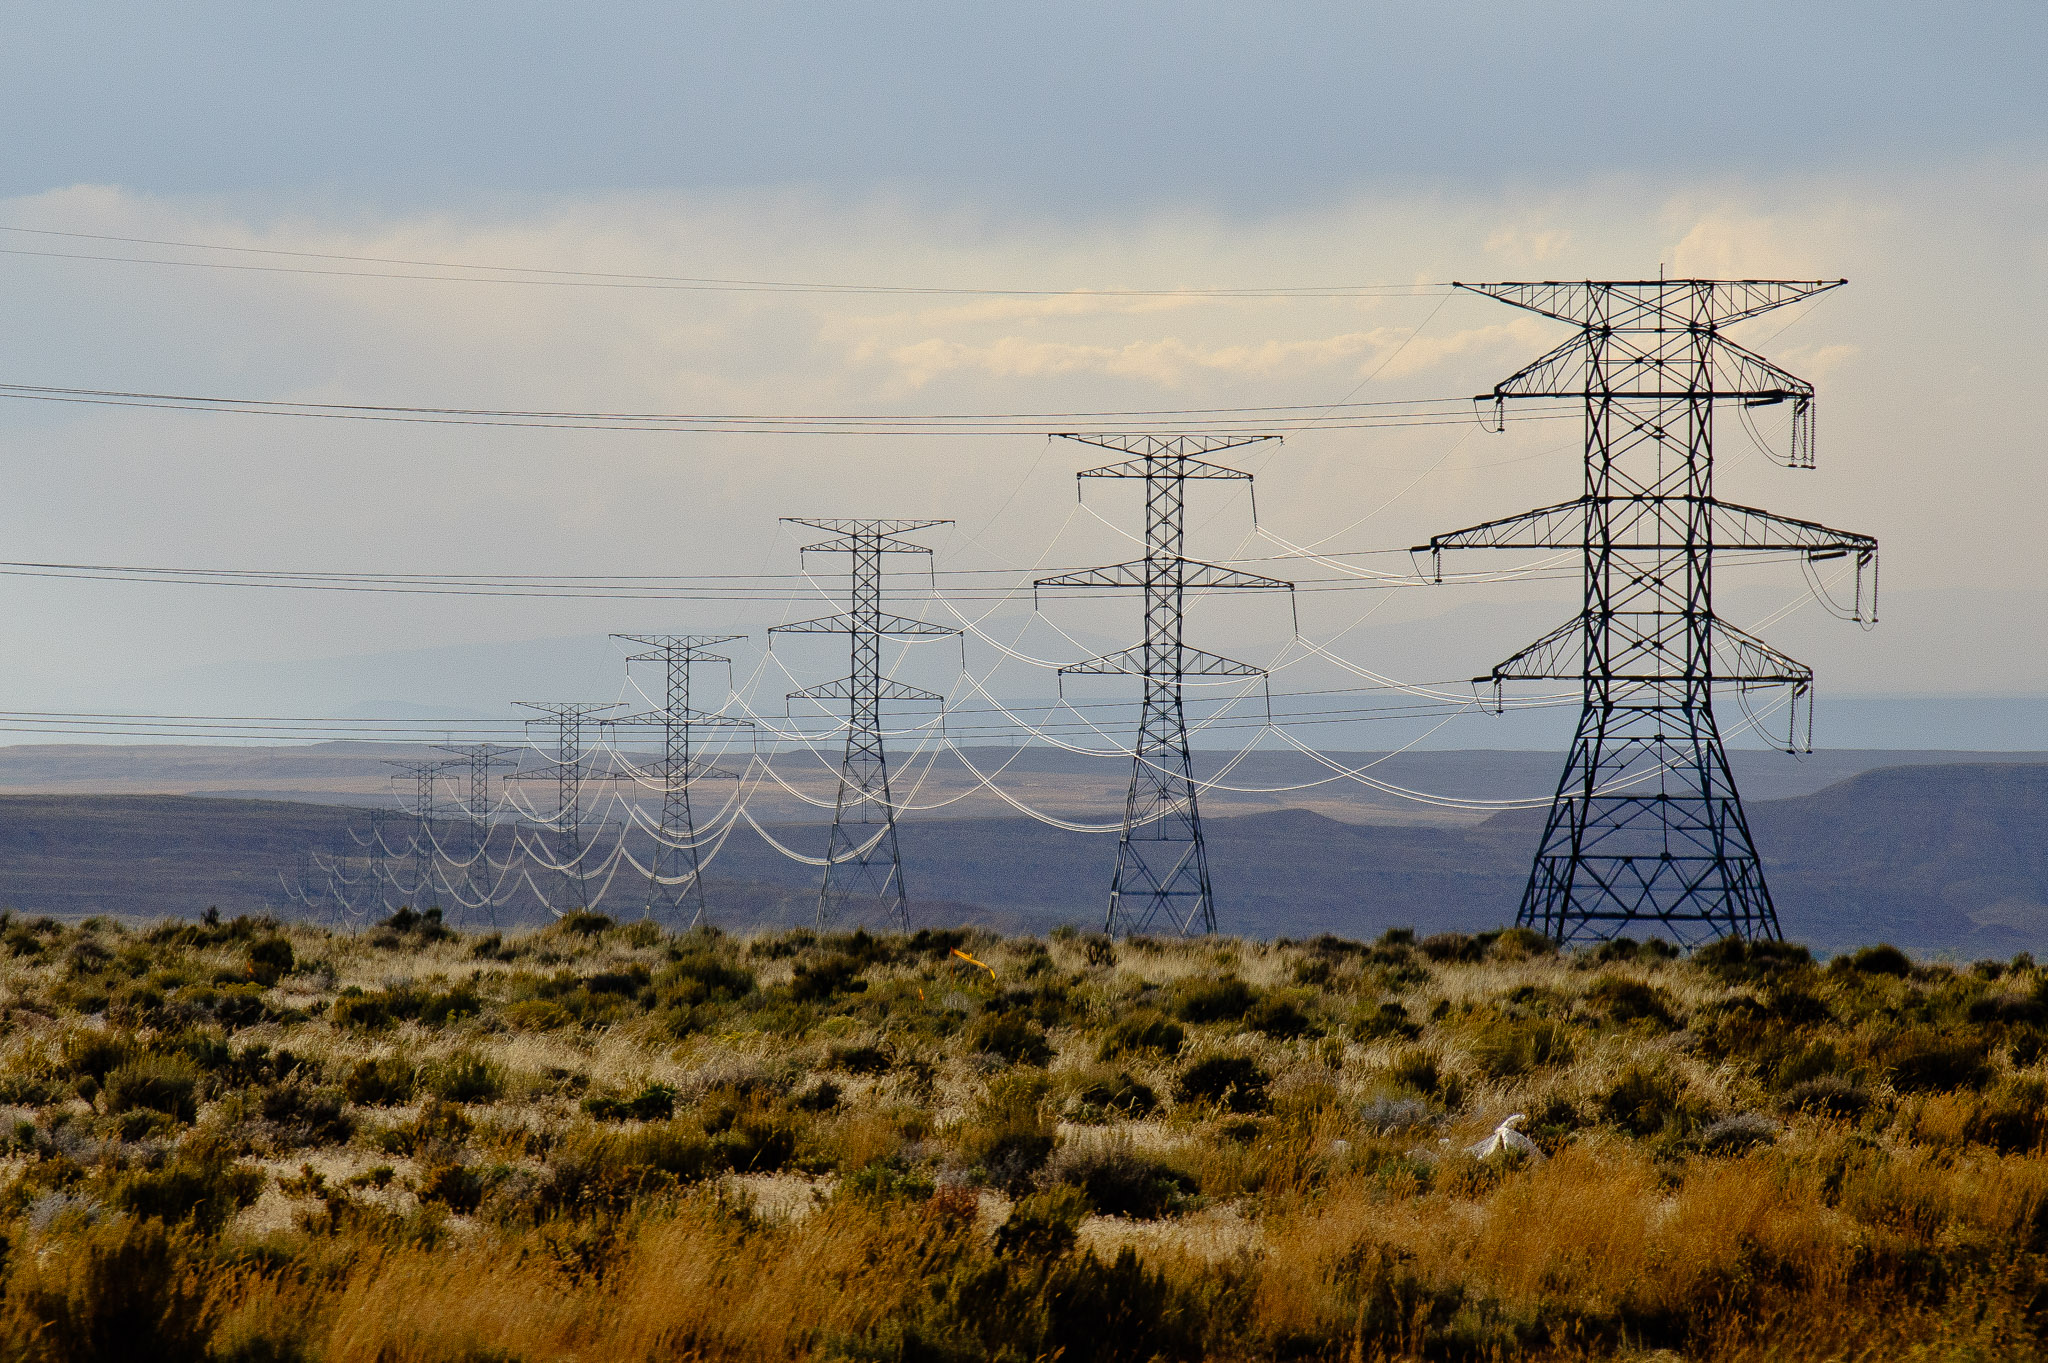 Electricity towers from the Bonanza Power Plant, south of Vernal, Utah.